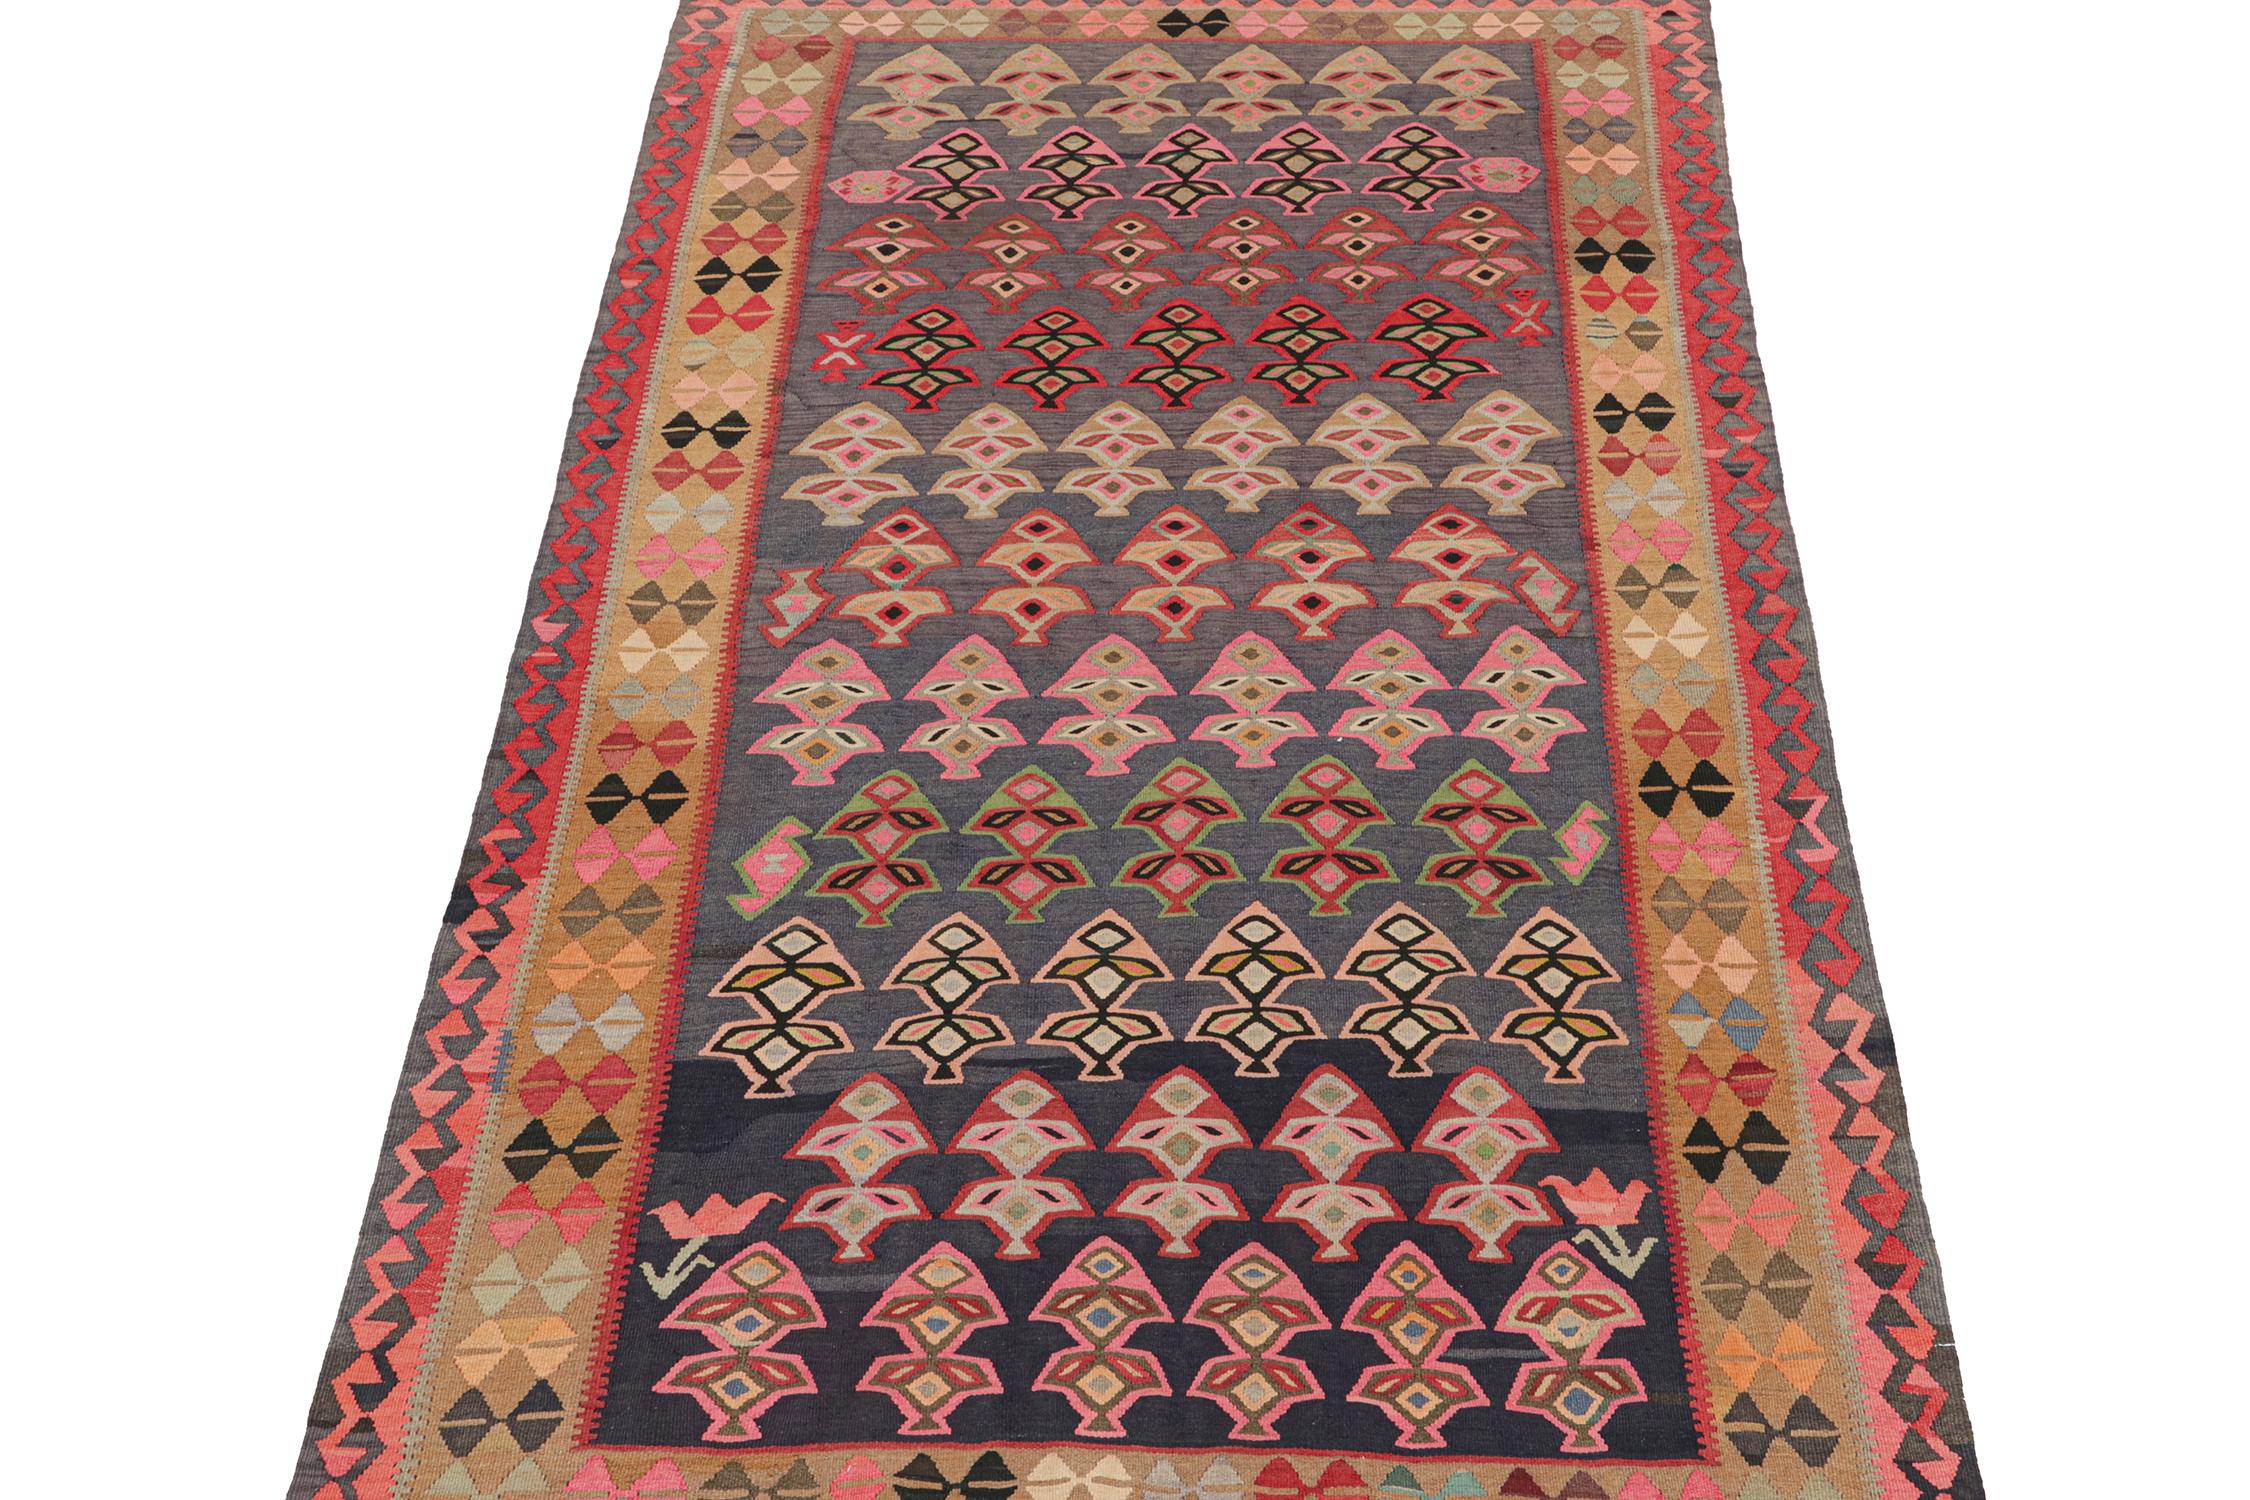 This vintage 5x10 Persian Kilim is a tribal rug believed to hail from Meshkin—a small Iranian village known for its craft. Handwoven in wool circa 1950-1960, these are sometimes called Northwest designs—a well-known Persian provenance. 

Further on